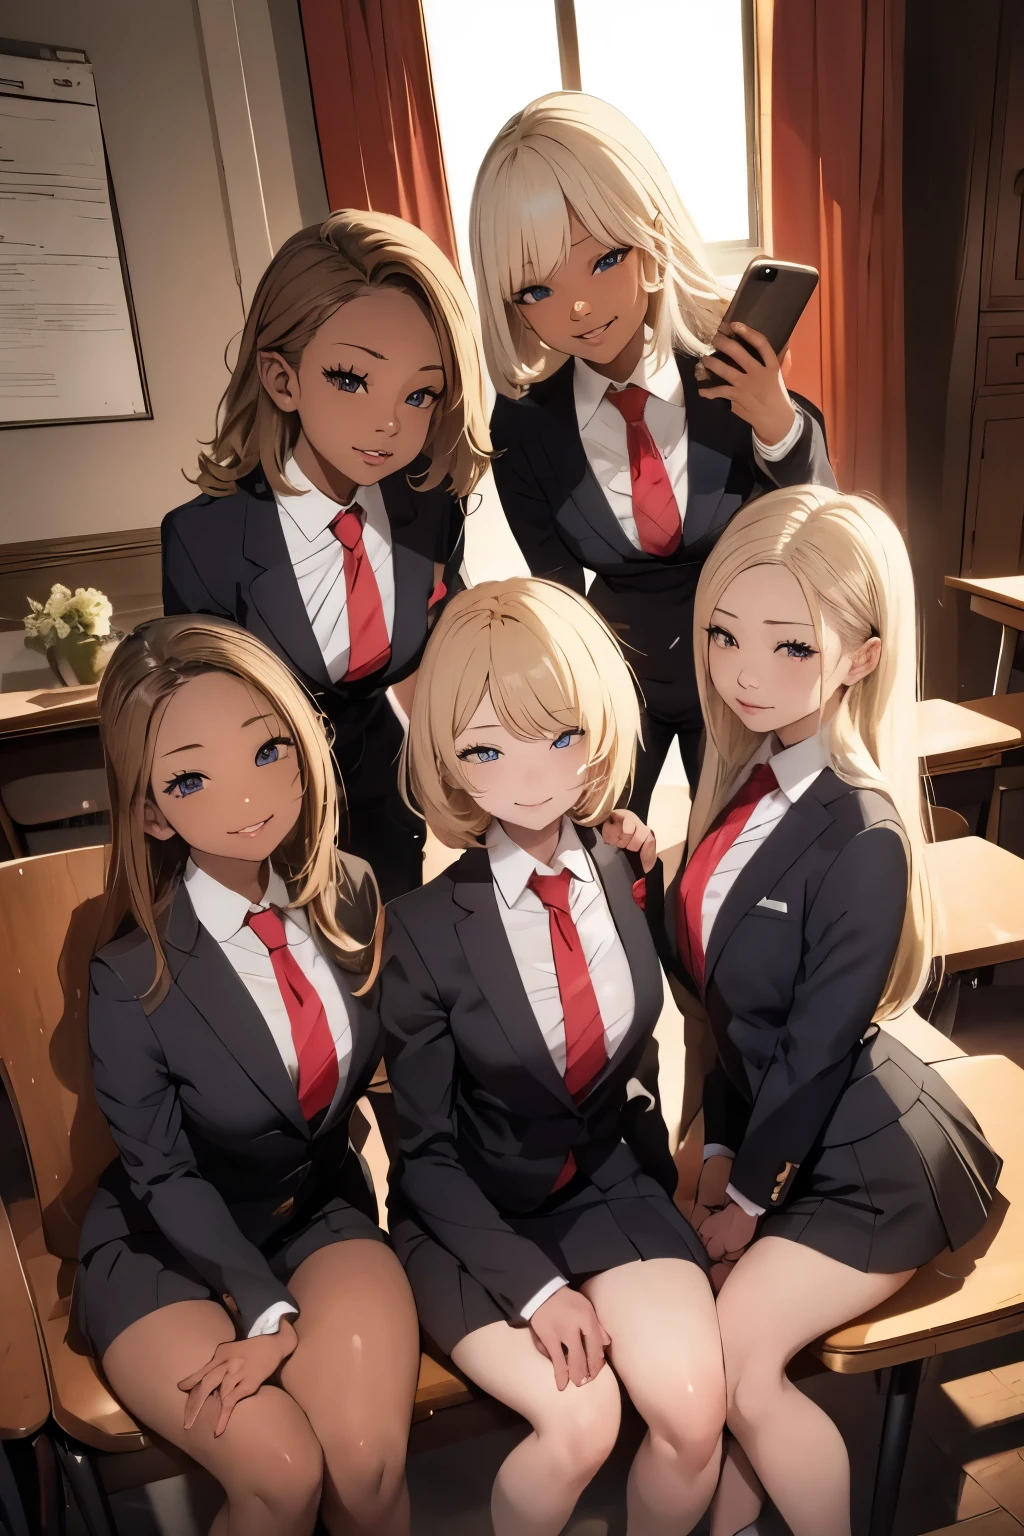 masterpiece, beautiful detail, beautiful light and shadow, 5girls in witch 1girl with dark skin and blonde hair 1girl with dark skin and 1girl with blonde hair, beautiful face, , school, blurred background with desk 